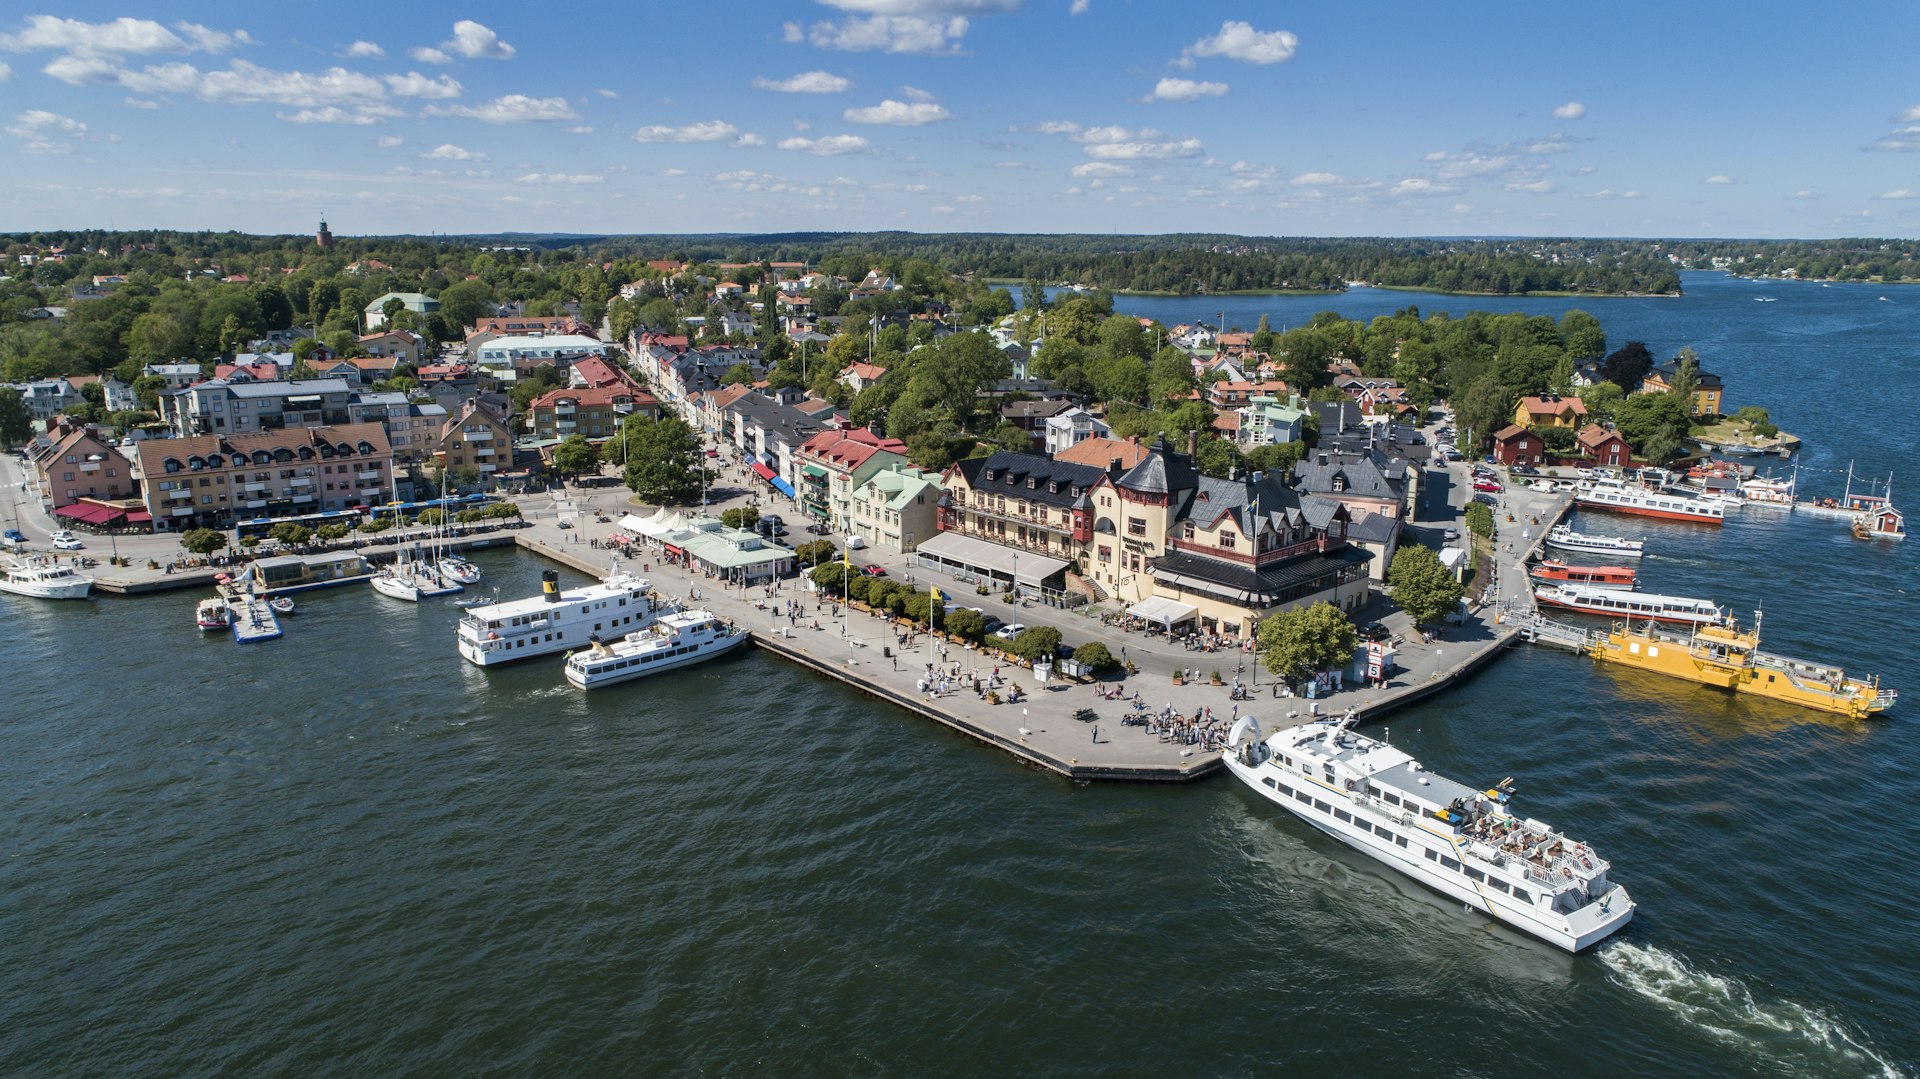 An aerial shot of an island town with colorful buildings and people moving around on a busy harbor-side street